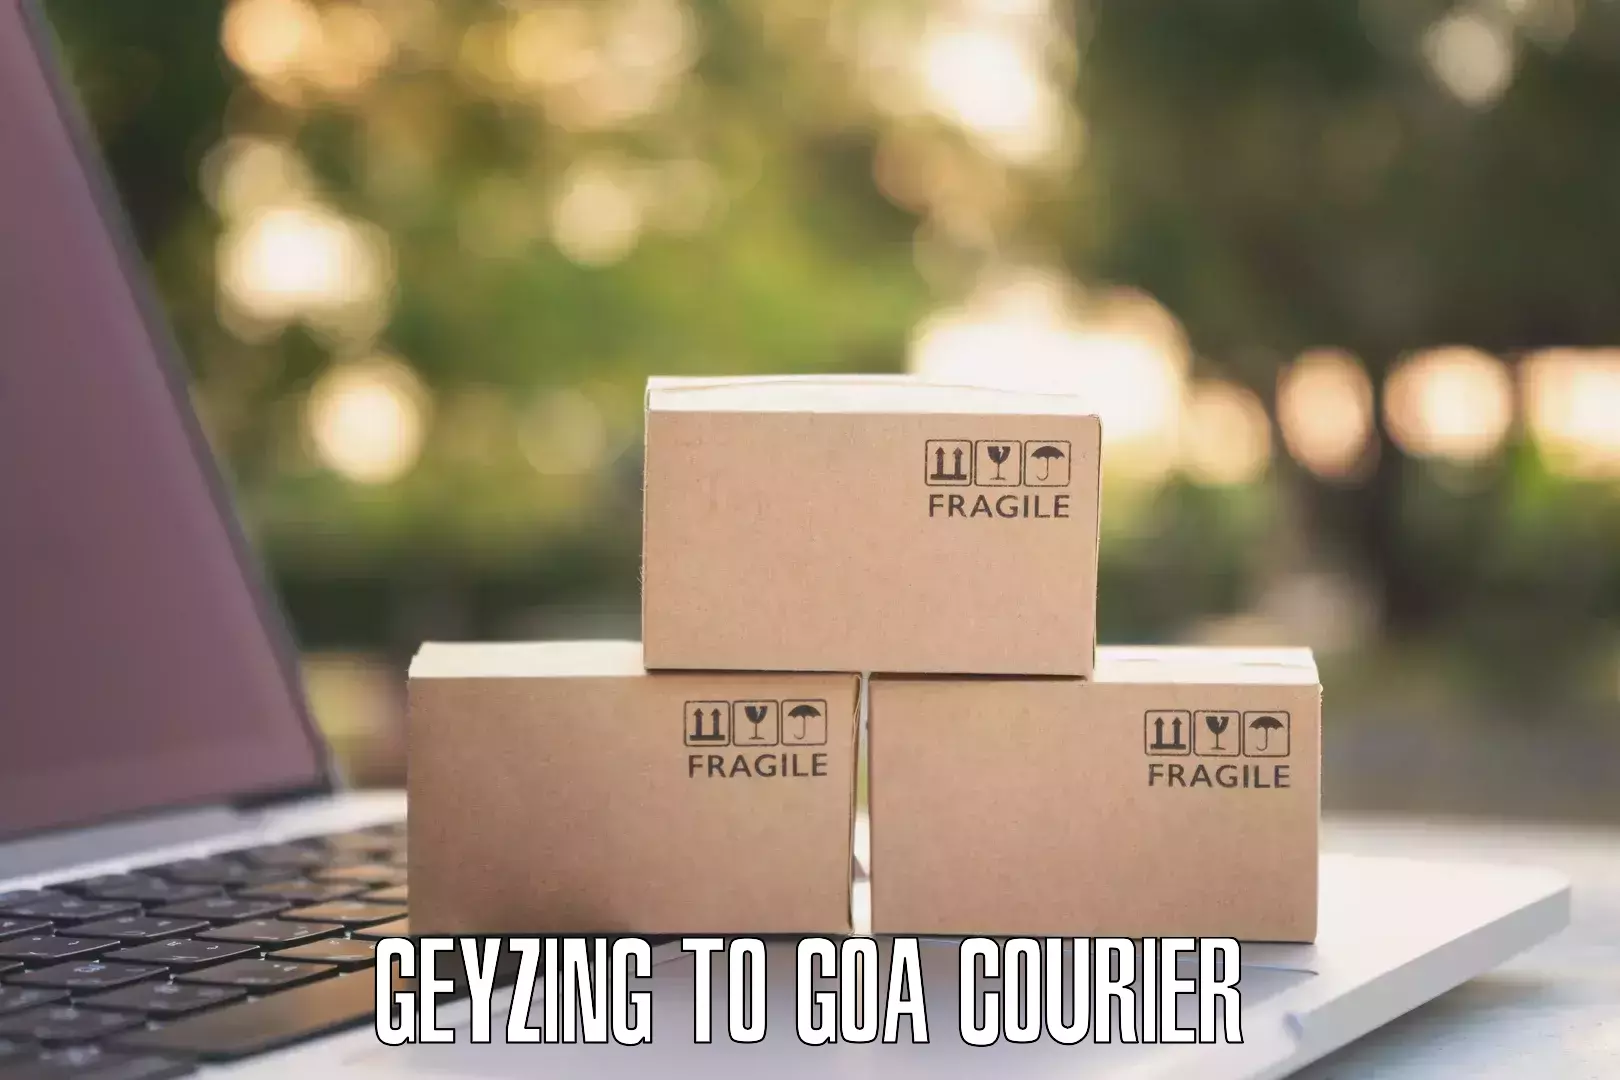 Courier service partnerships Geyzing to South Goa